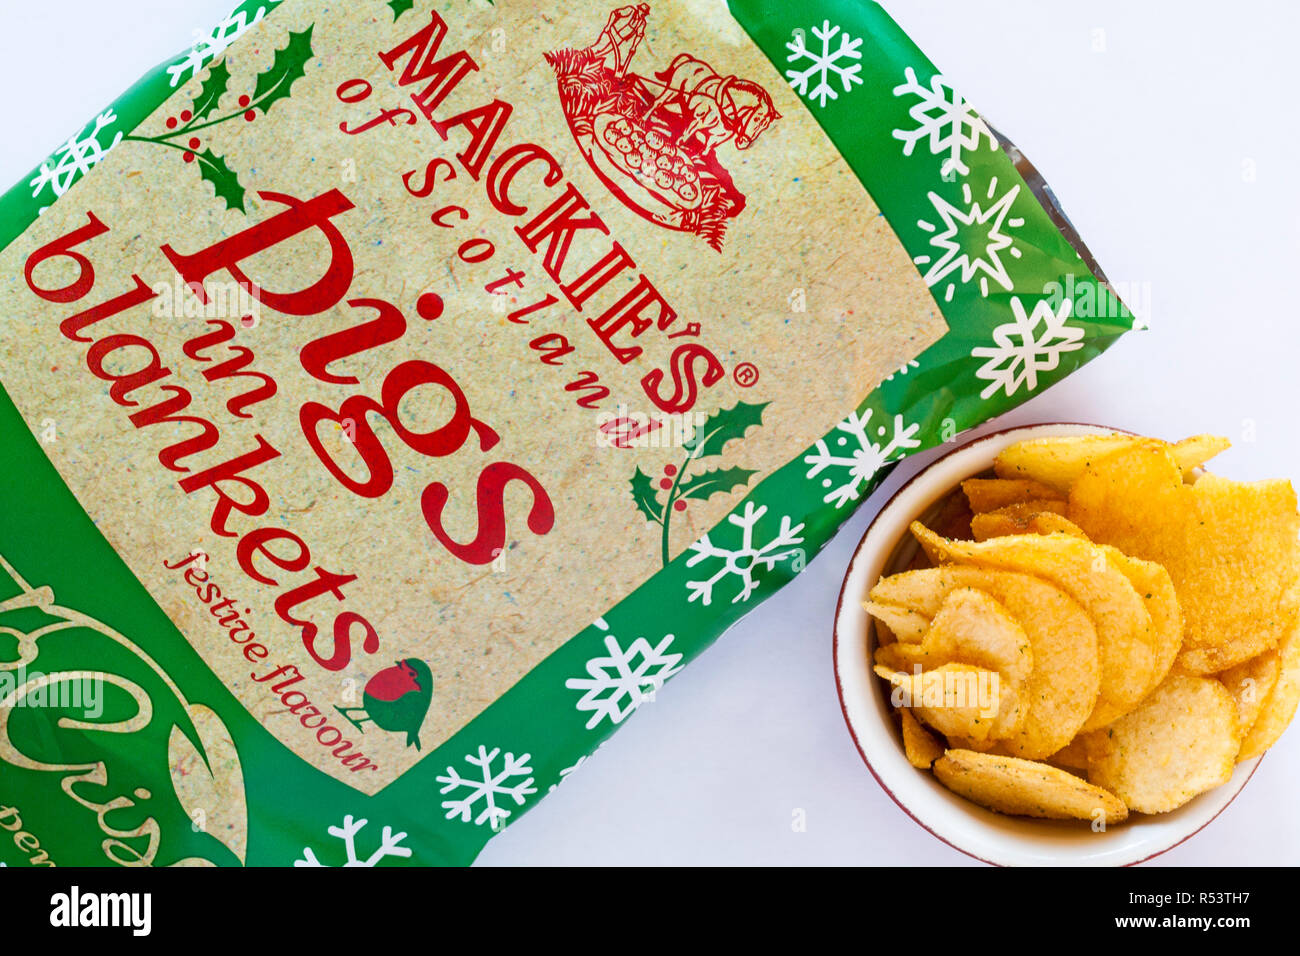 open packet of Mackie's of Scotland Pigs in Blankets festive flavour Potato Crisps with crisps in bowl set on white background - ready for Christmas Stock Photo